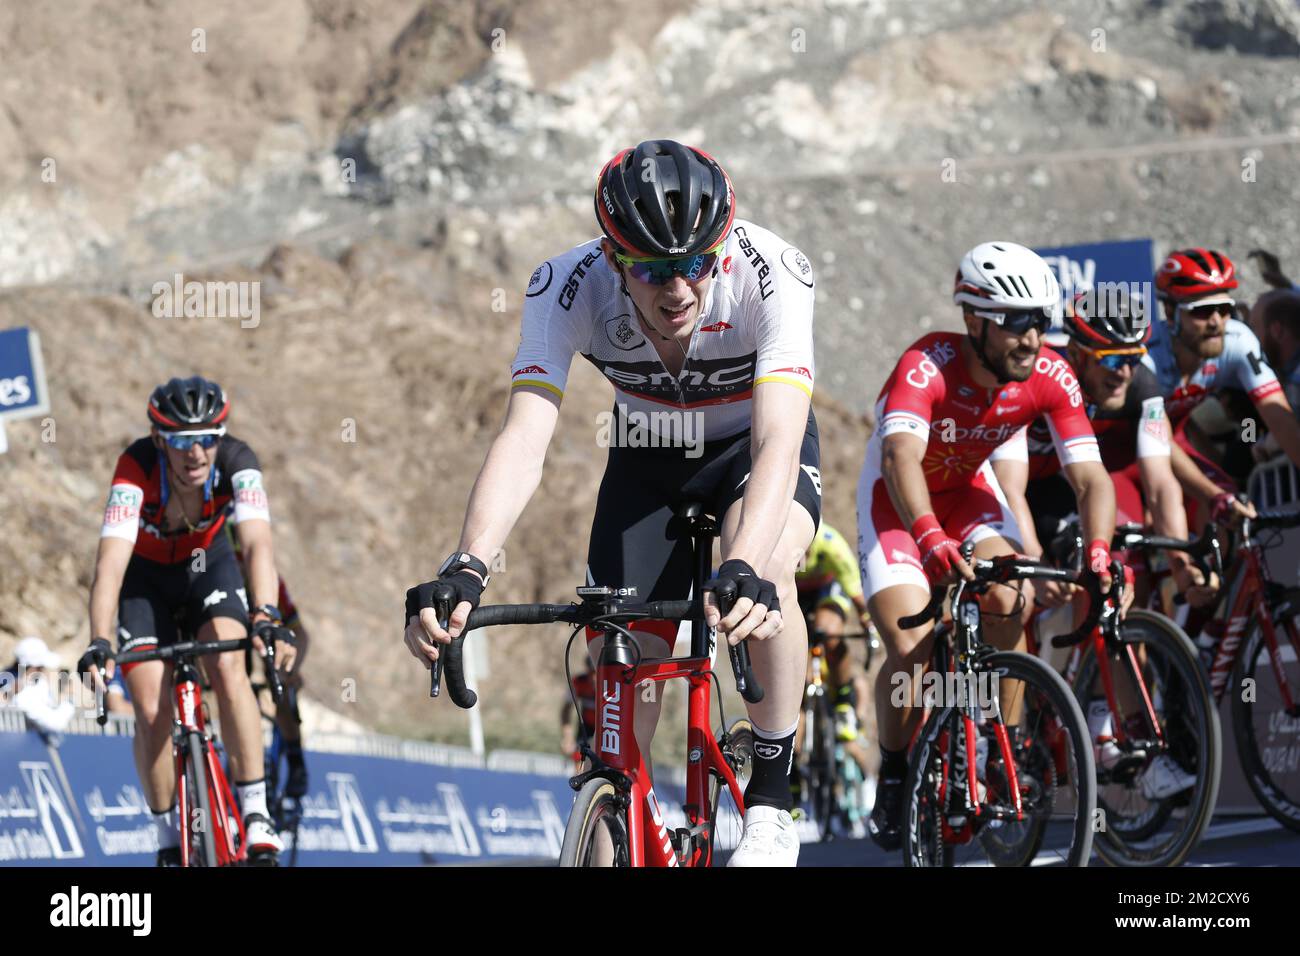 Belgian Nathan Van Hooydonck of BMC Racing Team pictured in action during stage 4 of the Dubai Tour 2018 cycling race, 172km from Dubai to Hatta Dam, United Arab Emirates, Friday 09 February 2018. The Dubai Tour 2018 is taking place from 6 to 10 February. BELGA PHOTO YUZURU SUNADA Stock Photo